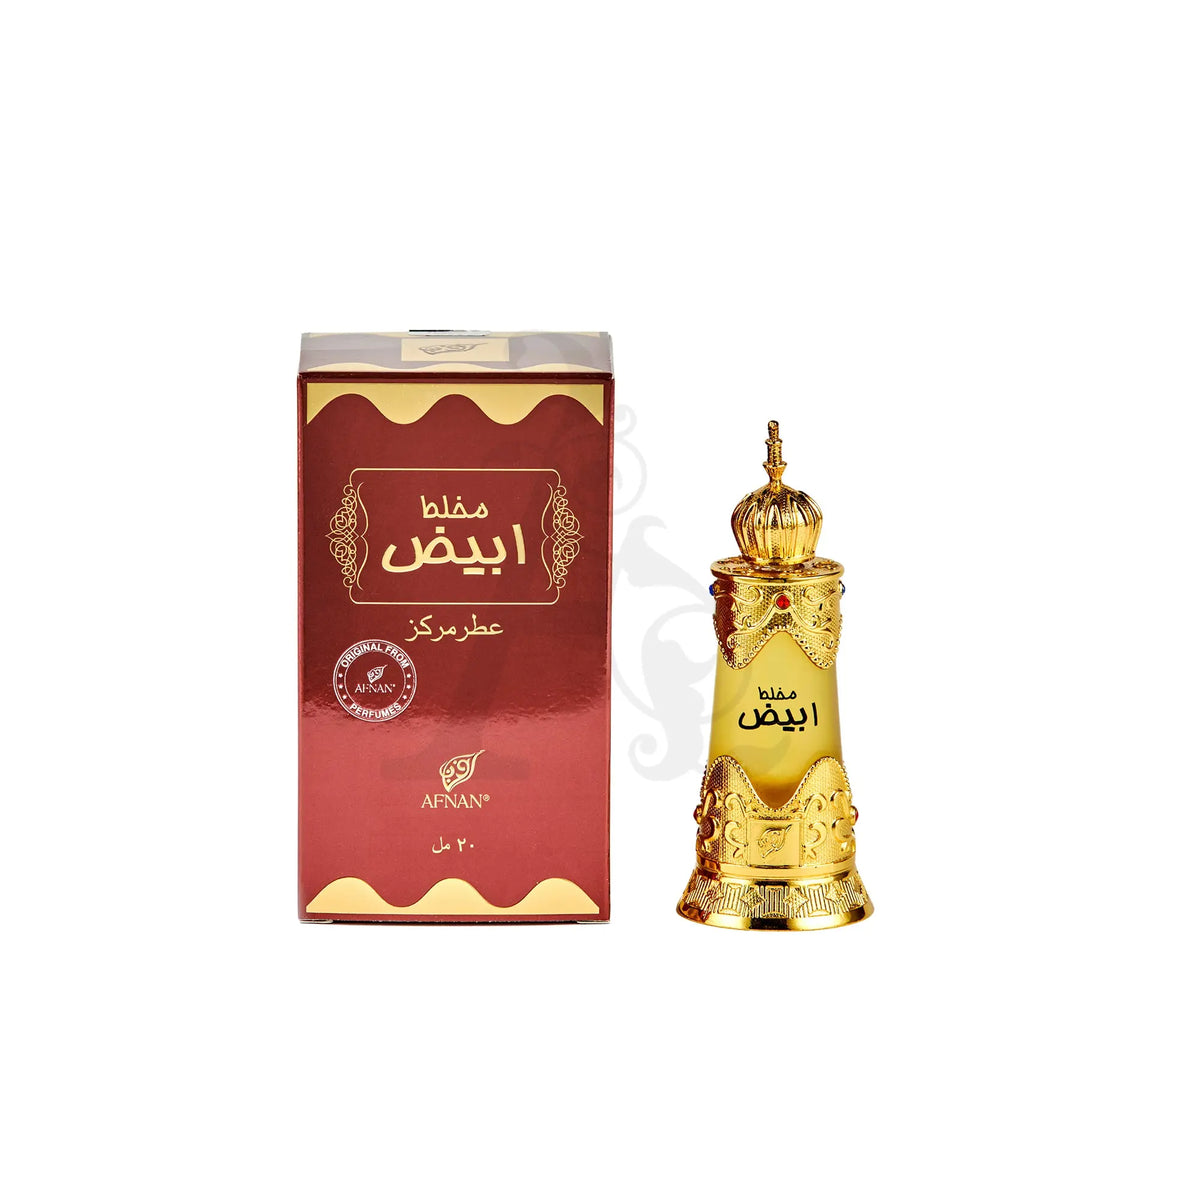 The image displays a perfume bottle and its packaging from Afnan Perfumes. The bottle is ornate with a traditional Middle Eastern design, featuring a golden color with intricate patterns and topped with a decorative dome-like cap. It is labeled "Mukhallat Abiyad" in both Arabic and English script. The box has a rich maroon color with golden accents and similar Arabic calligraphy, indicating the fragrance name and brand. The packaging suggests a luxurious scent with a classic appeal.